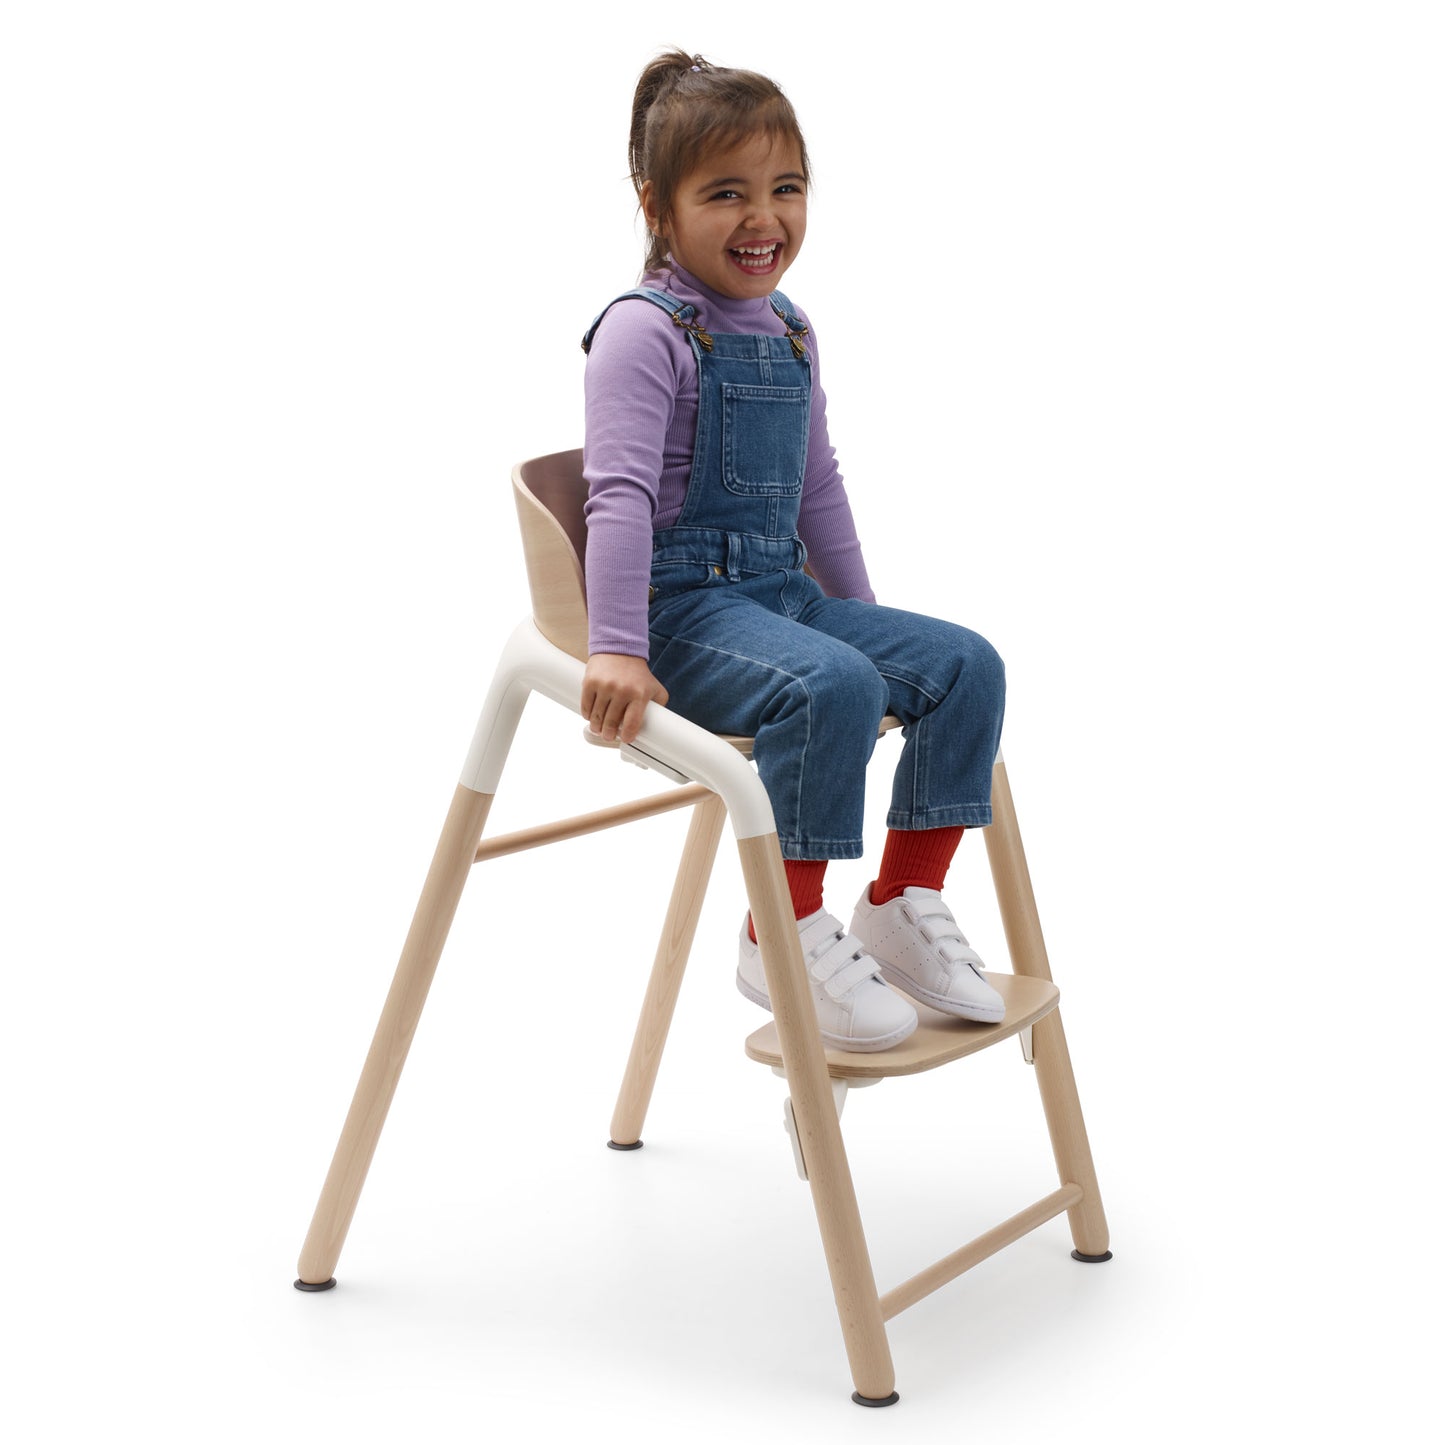 Child sits in Bugaboo Giraffe High Chair Complete - Natural Wood/White